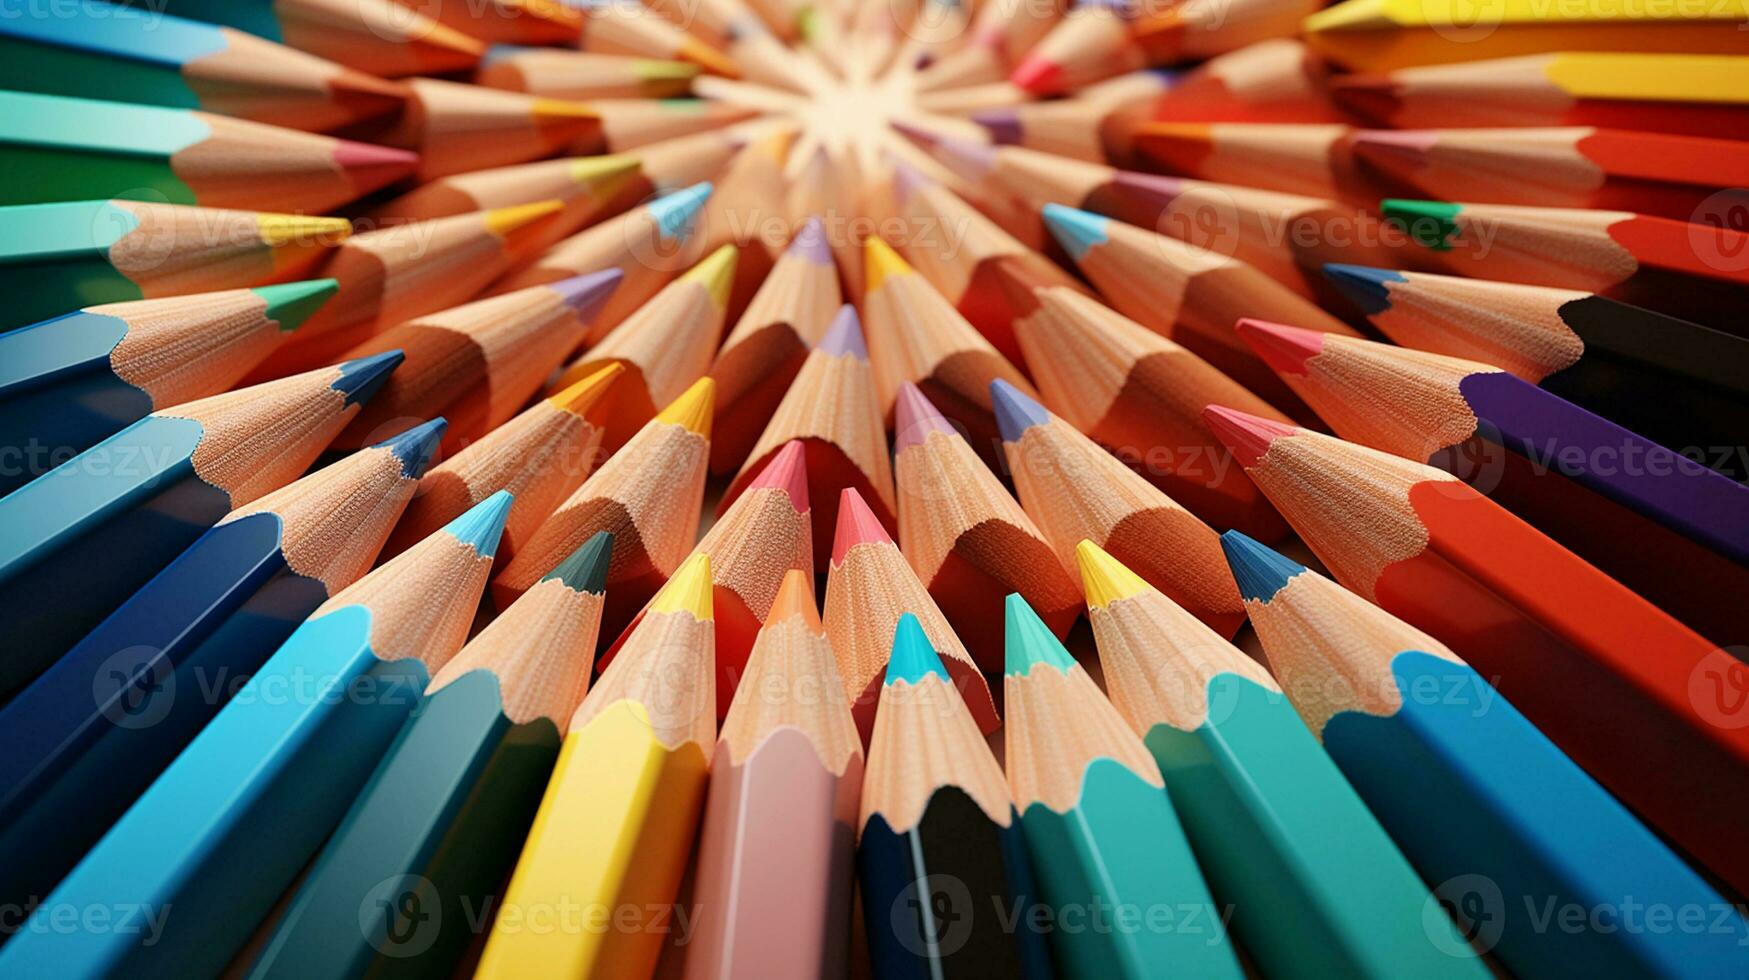 An image of color pencils arranged in a playful with space for text, whimsical pattern on a textured surface, inviting viewers to explore their own creative imagination. AI generated photo